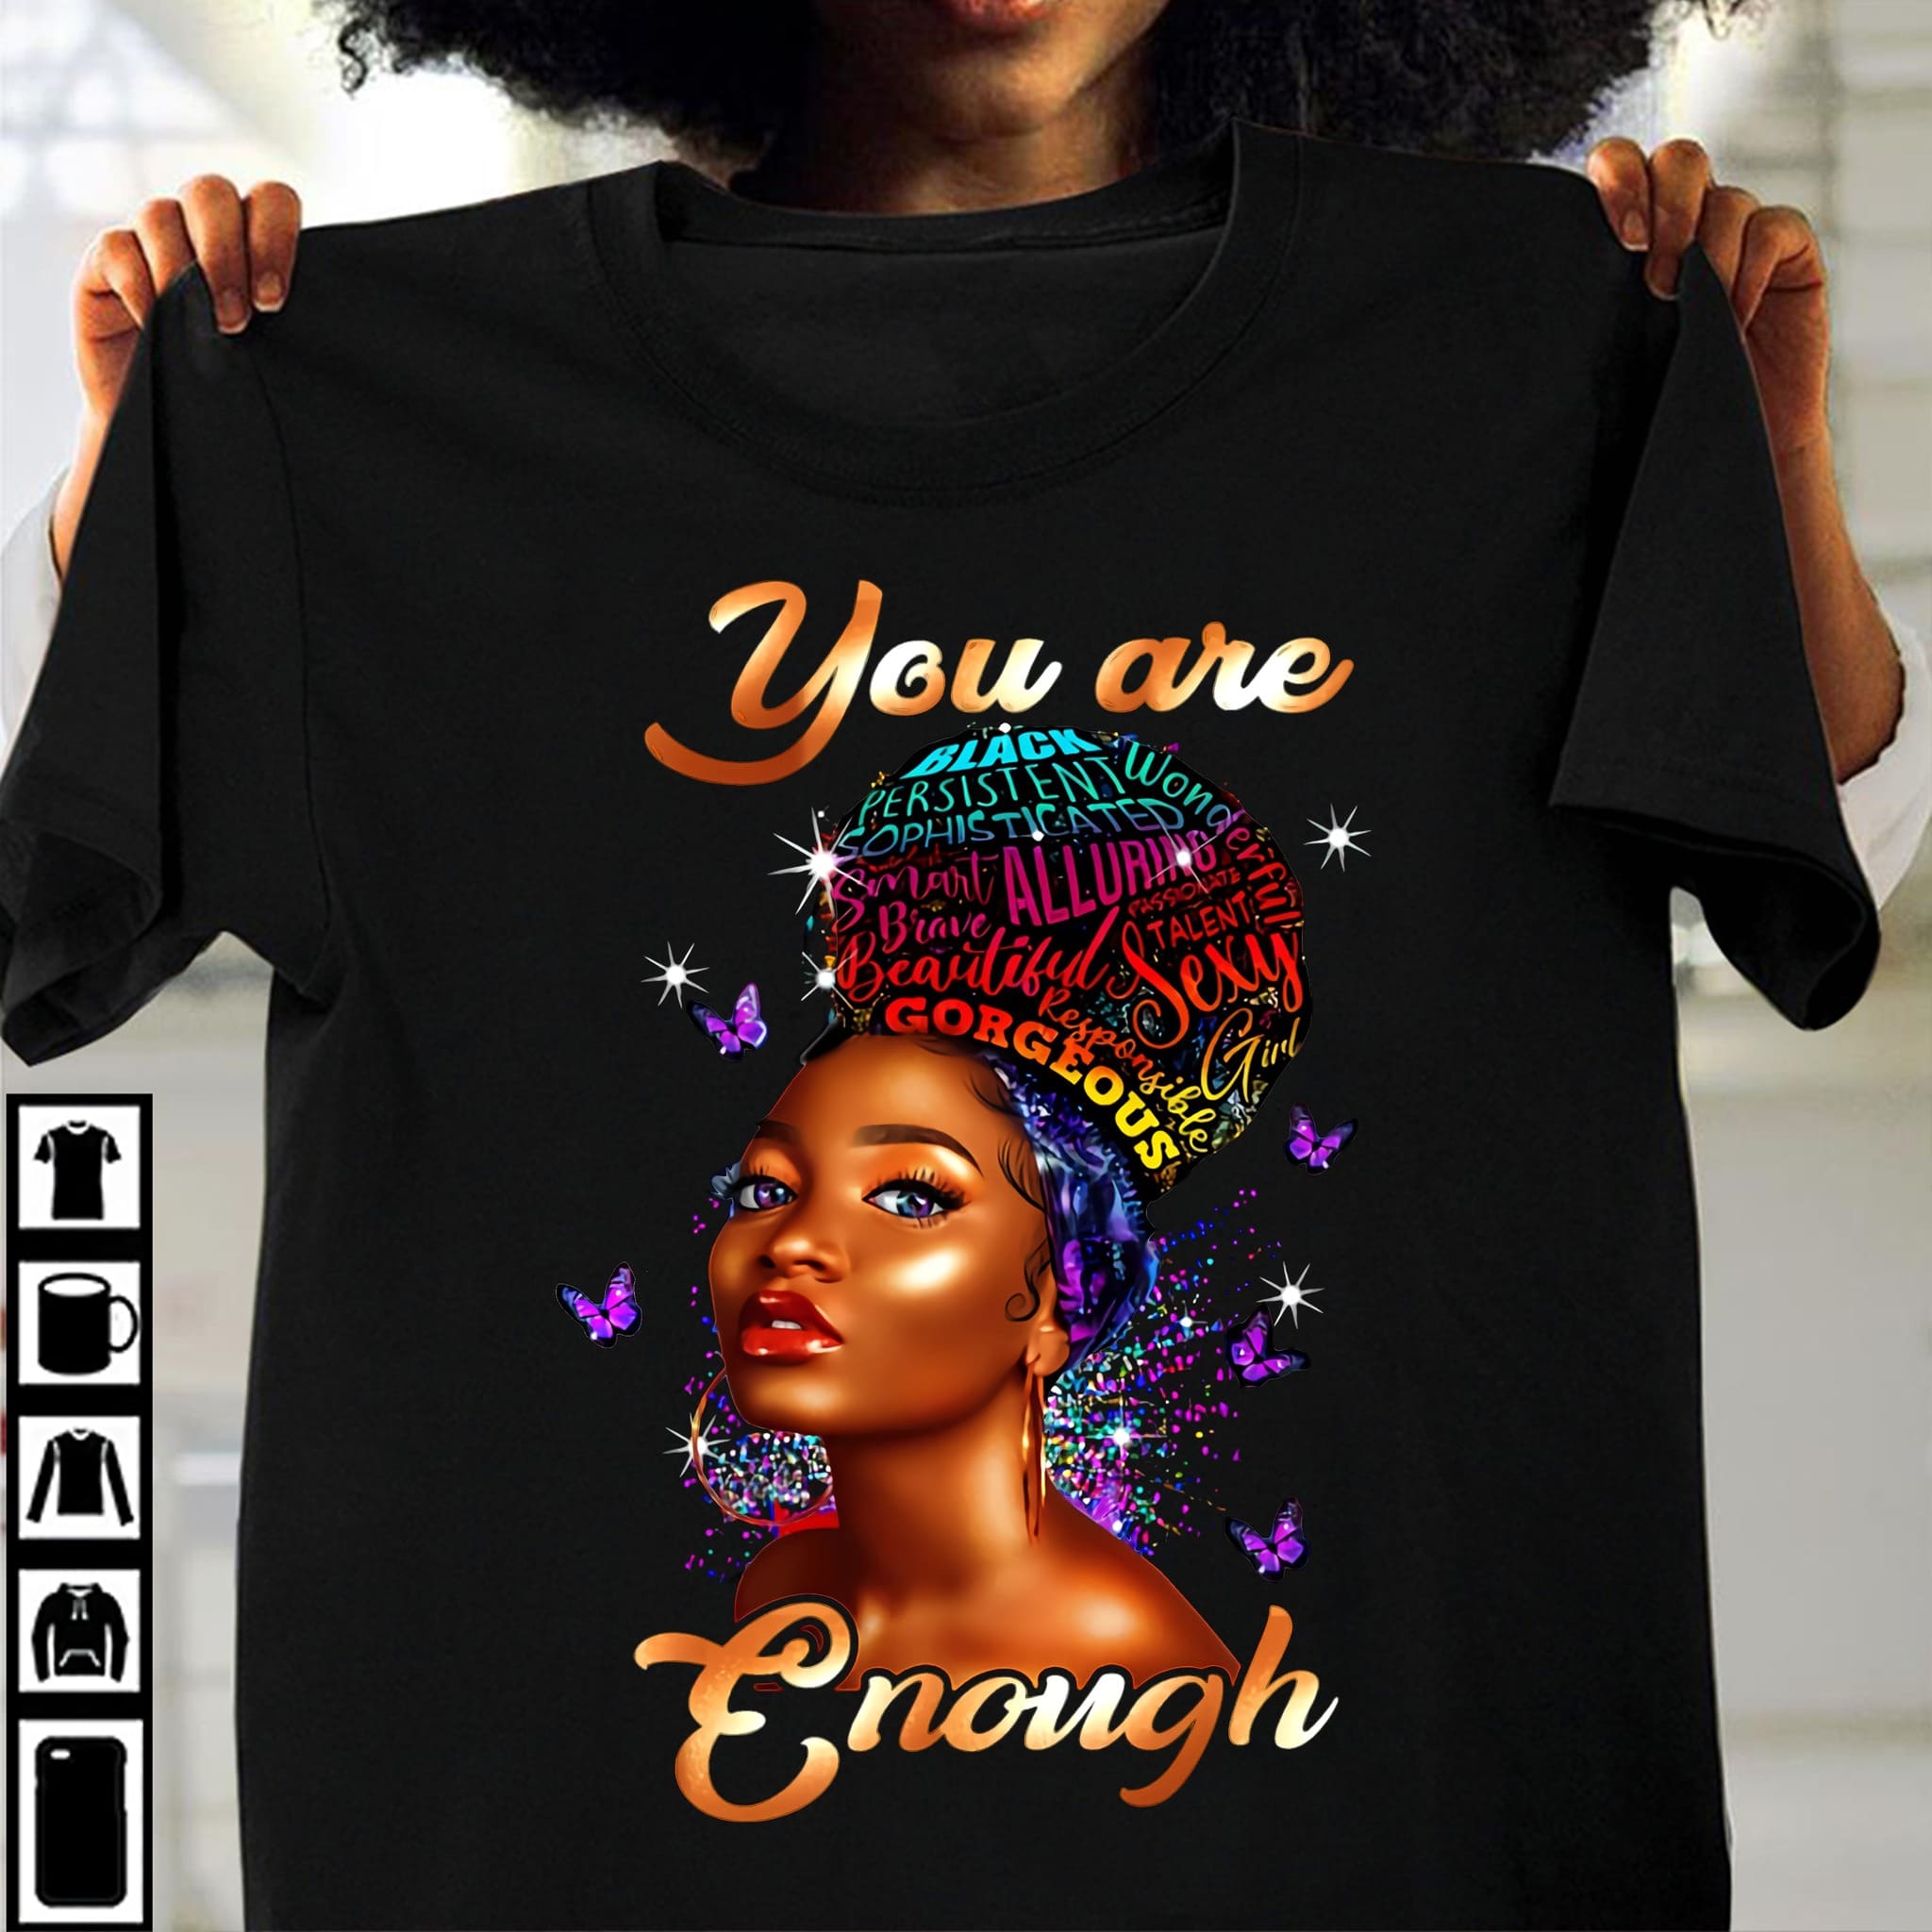 Beautiful Black Woman - you are black persistent wonderful sexy gorgeous enough